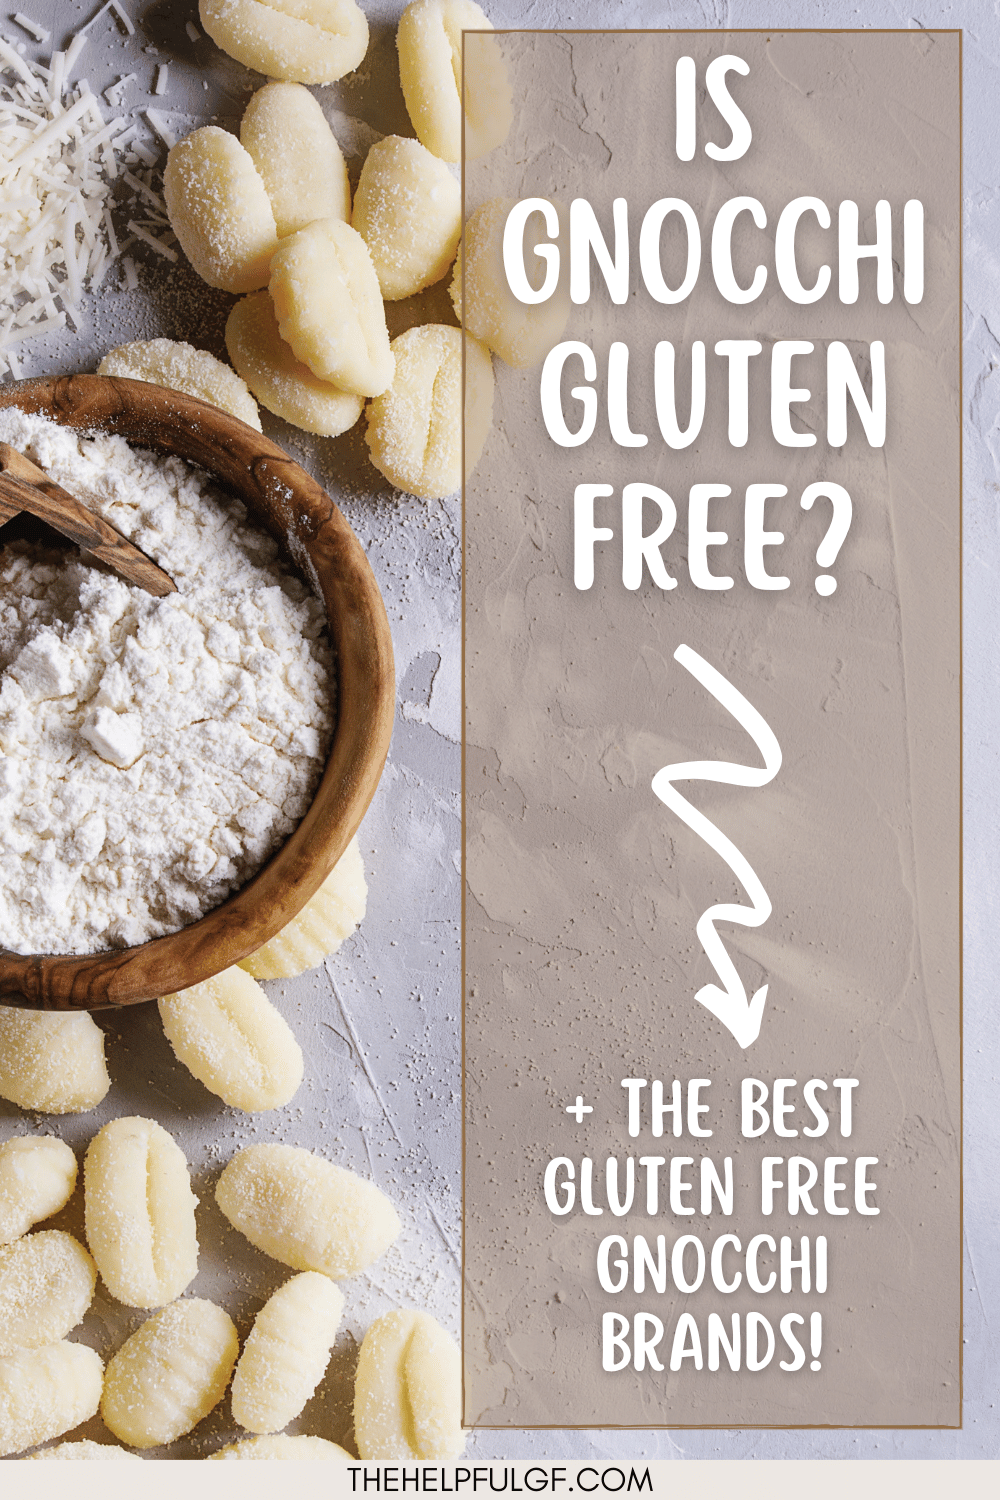 Gnocchi spread out on a counter next to a wooden bowl filled with flour and grated white cheese in the corner with a text overlay that says 'Is Gnocchi gluten free? + the best gluten free gnocchi brands!'